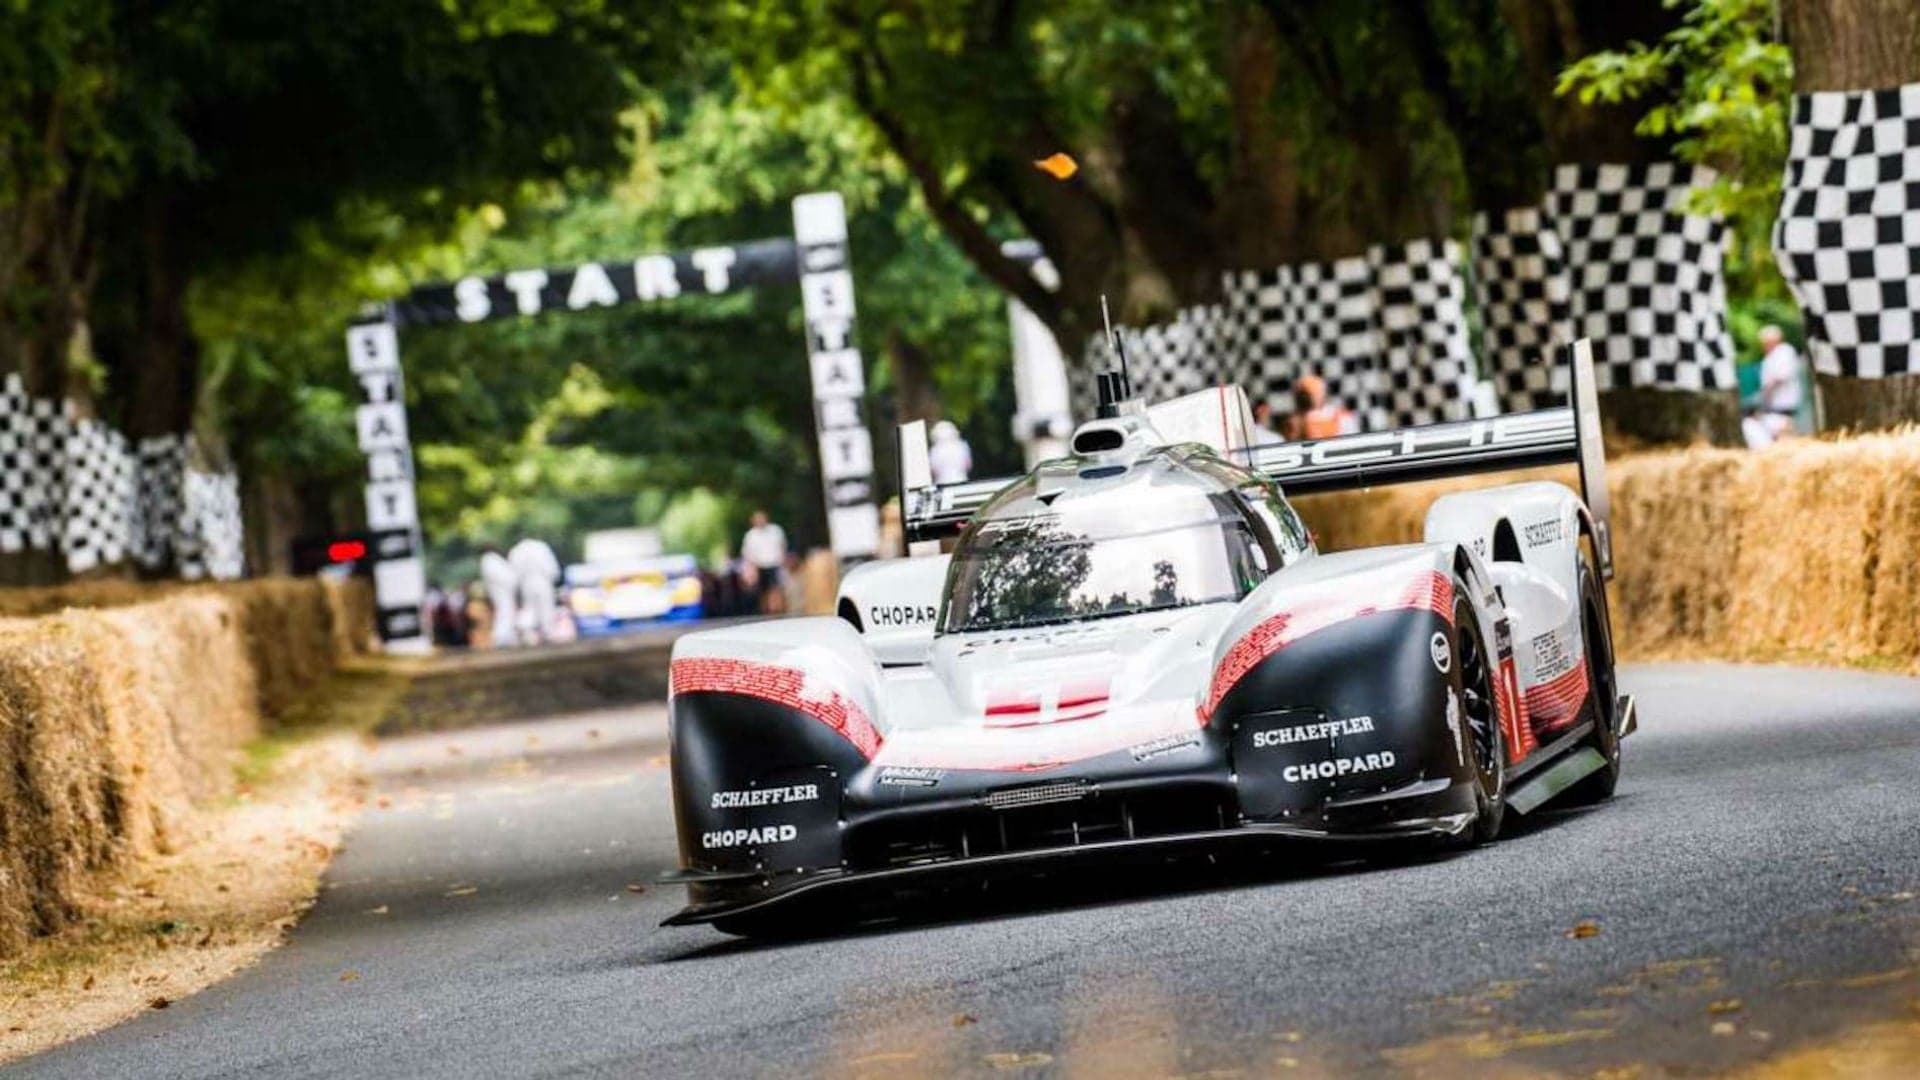 The Five Best Moments from the 2018 Goodwood Festival of Speed